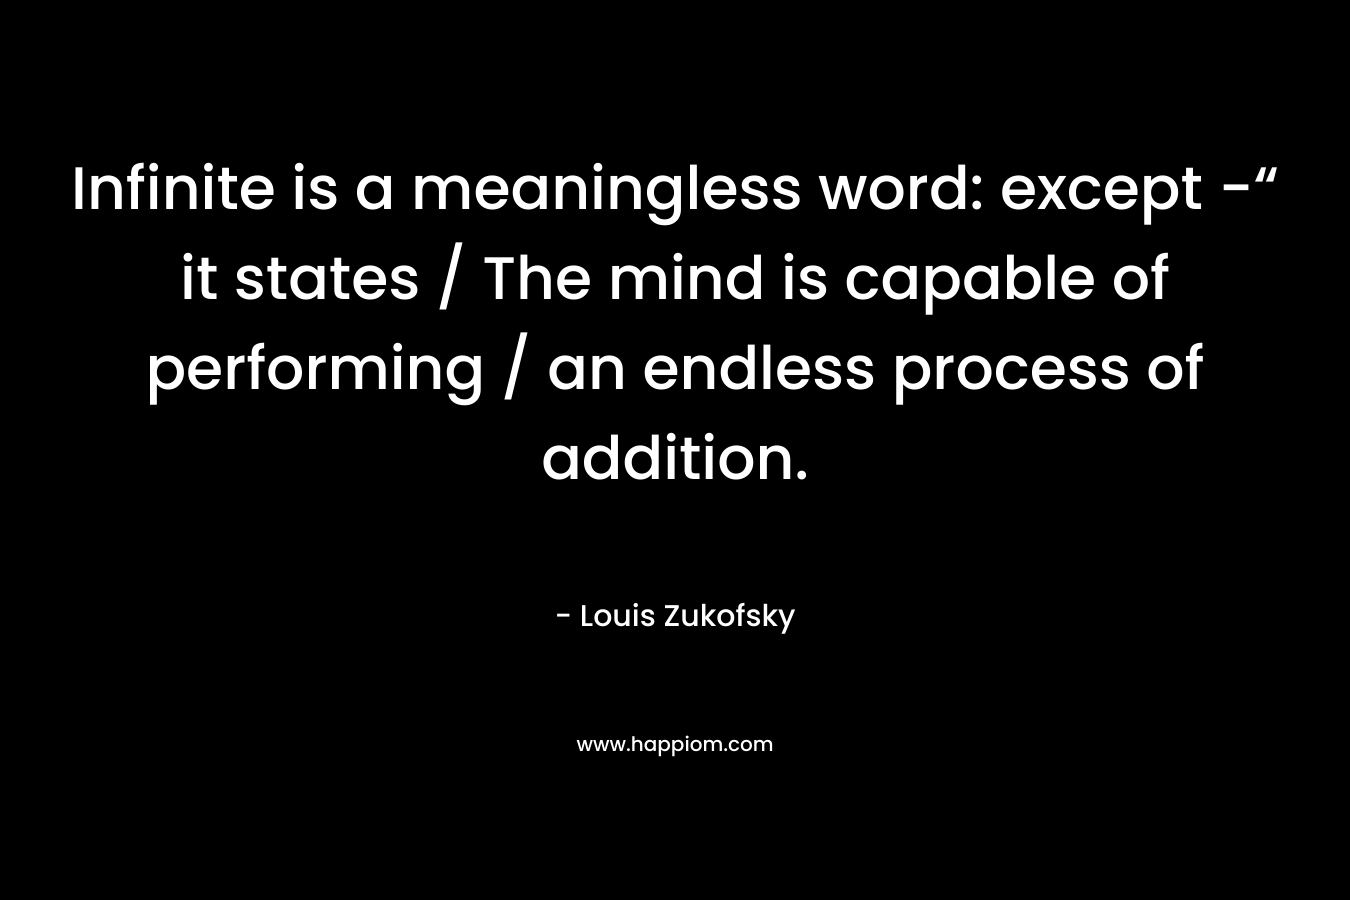 Infinite is a meaningless word: except -“ it states / The mind is capable of performing / an endless process of addition.